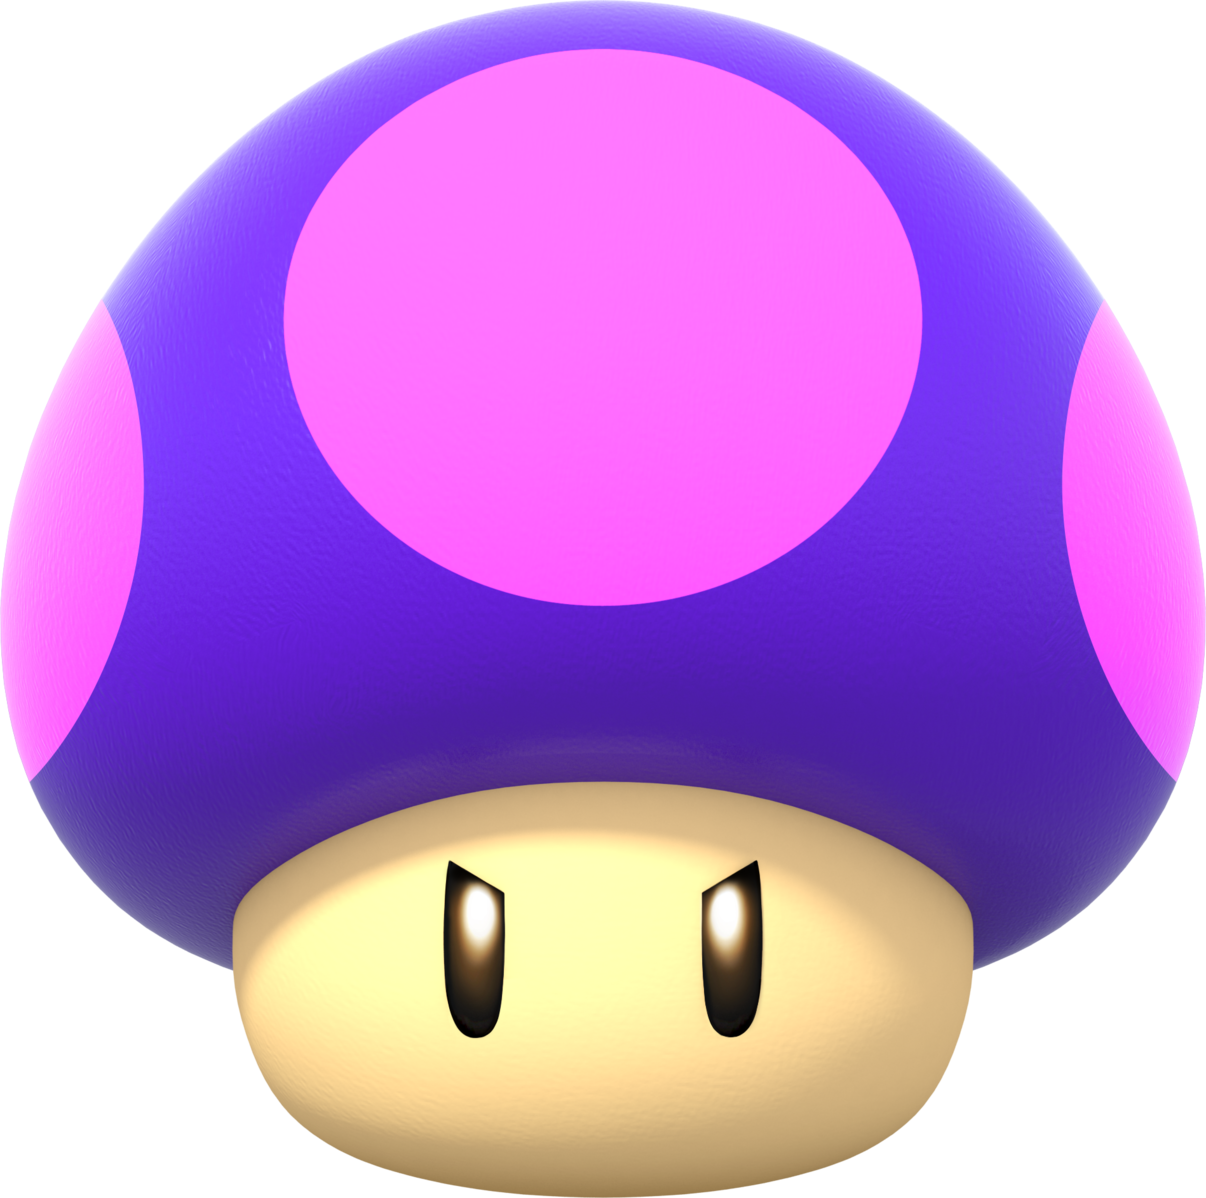 A Cartoon Mushroom With Pink Dots PNG